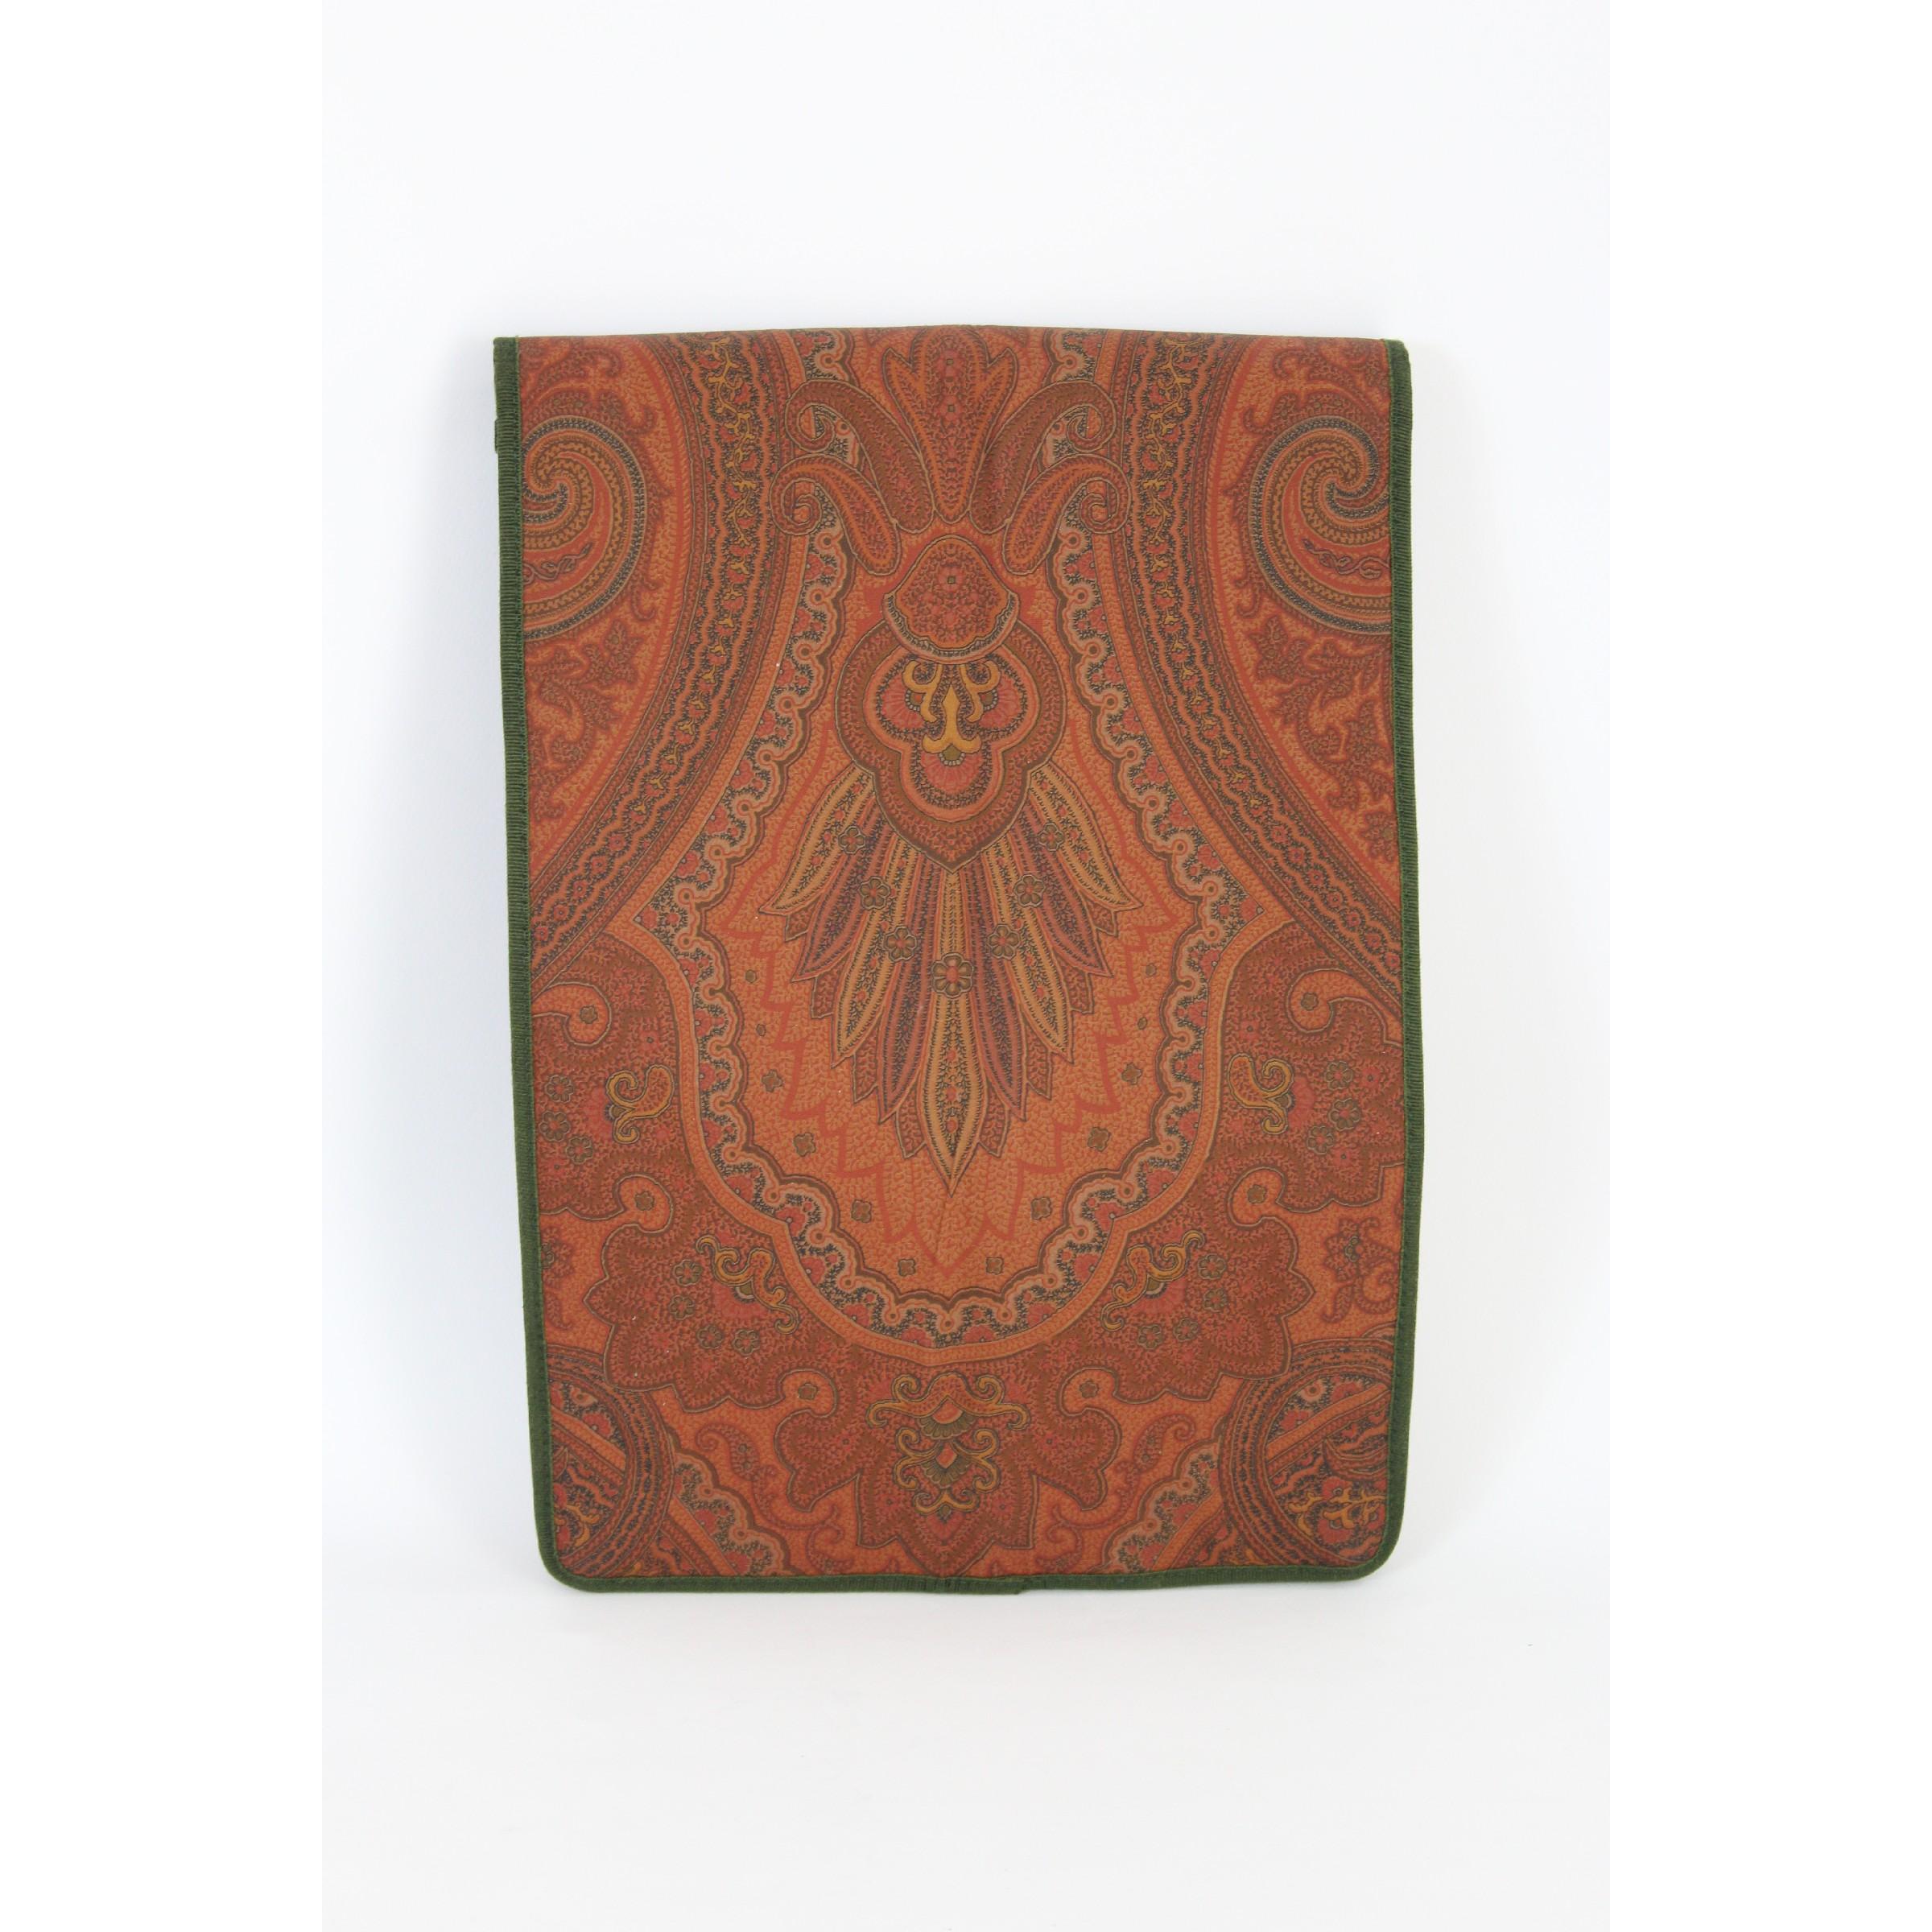 Etro travel tie in canvas, brown with typical geometric designs of the fashion house, green finish, clip closure. Excellent vintage conditions. Made in Italy.

Measures: 42 x 29 cm